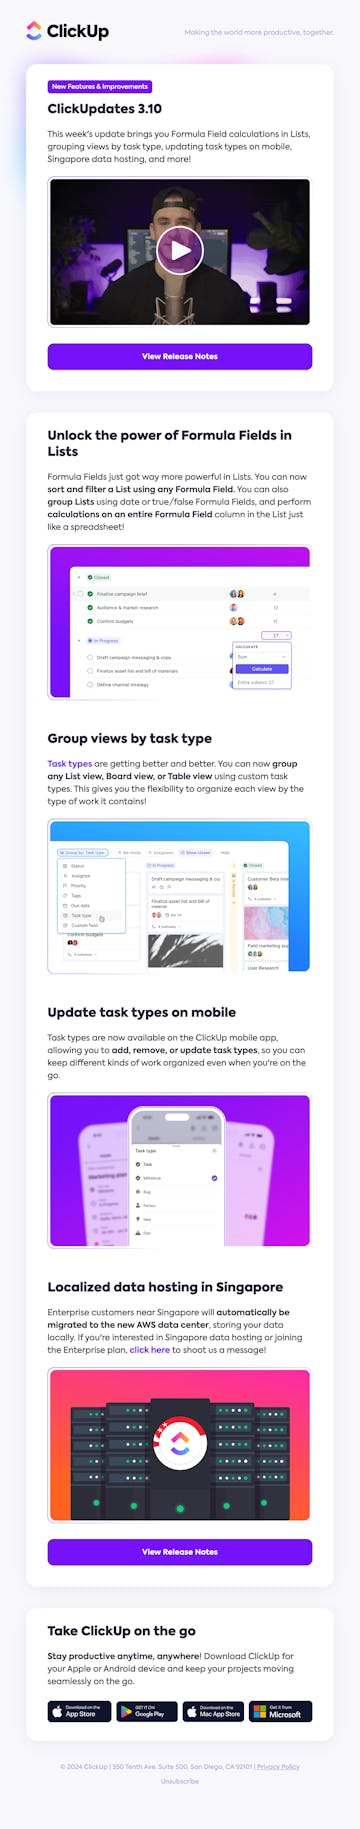 ClickUp Email Design Thumbnail Preview